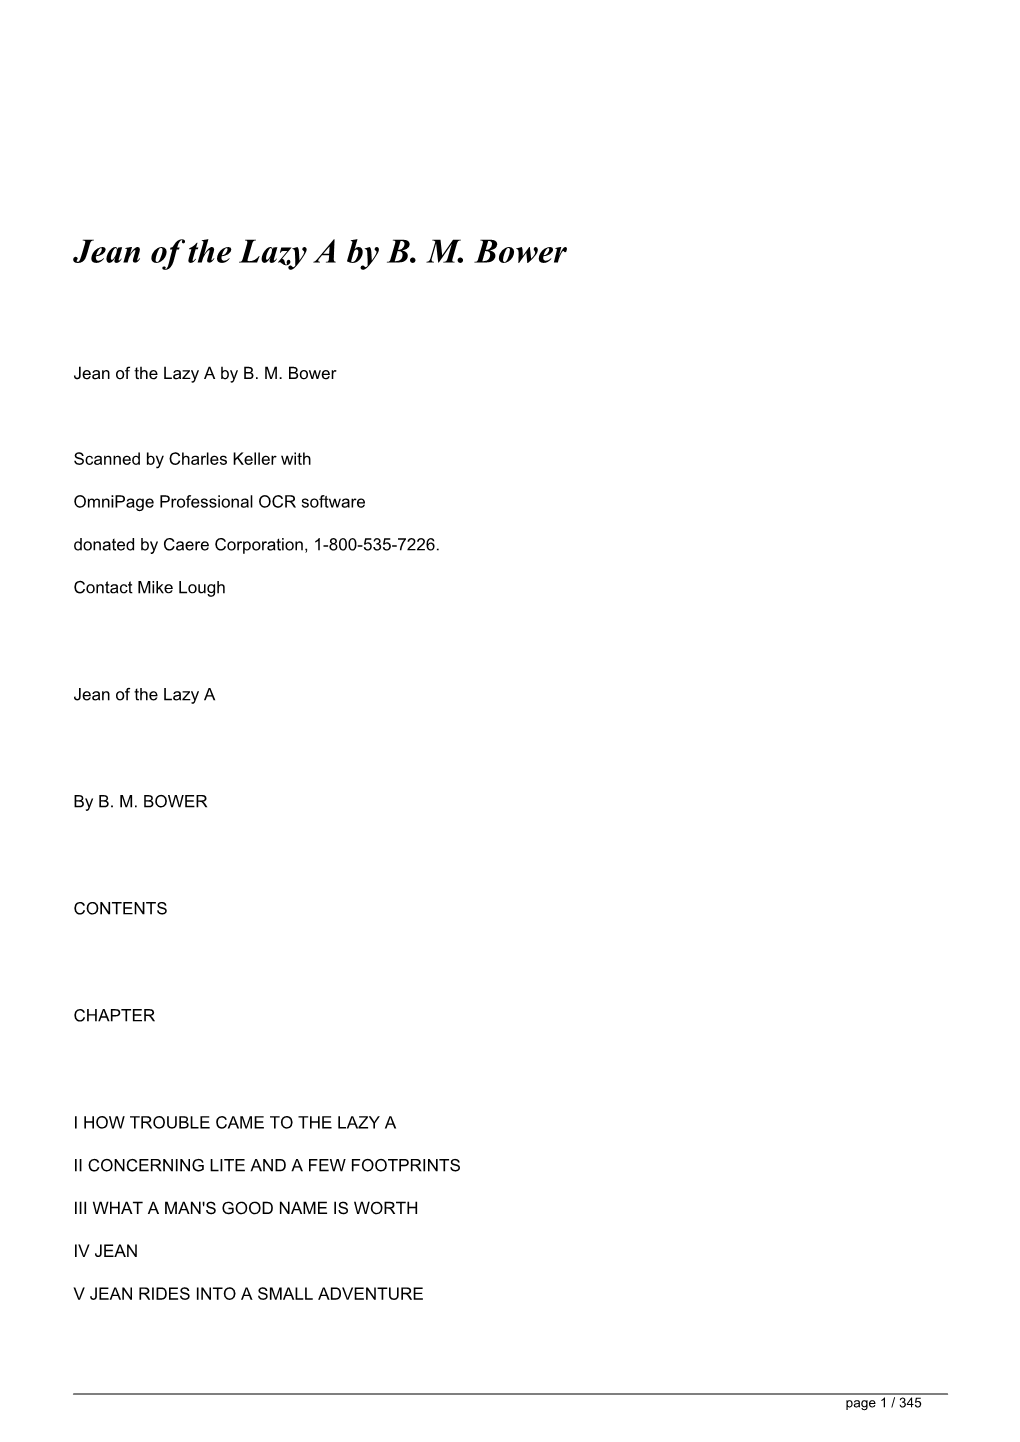 Jean of the Lazy a by BM Bower&lt;/H1&gt;